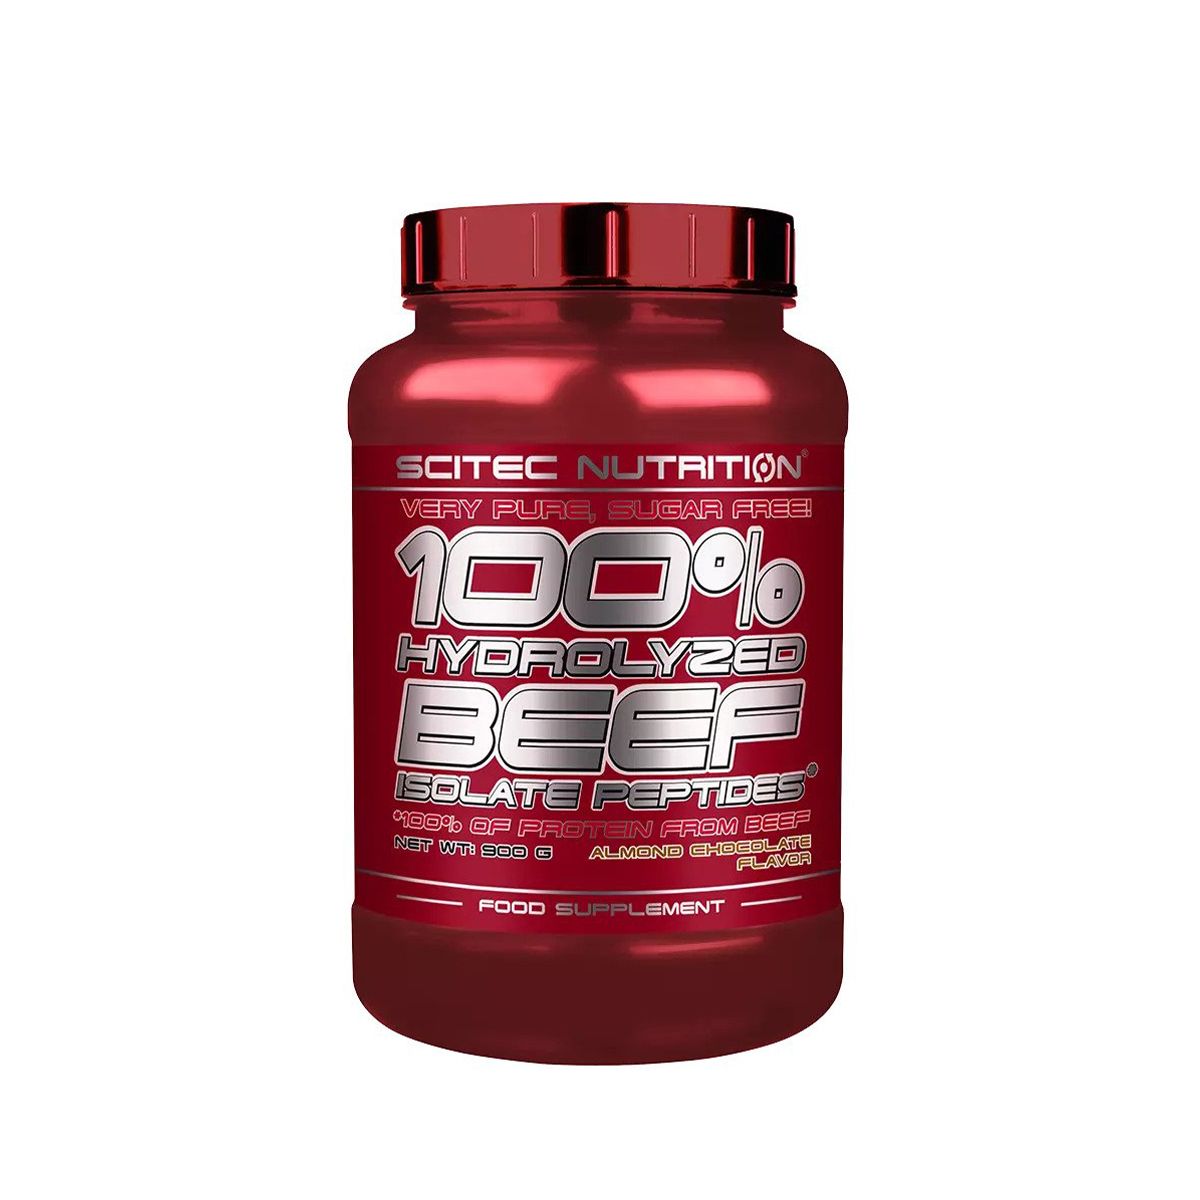 SCITEC NUTRITION - 100% HYDROLYZED BEEF ISOLATE PEPTIDES - 900 G